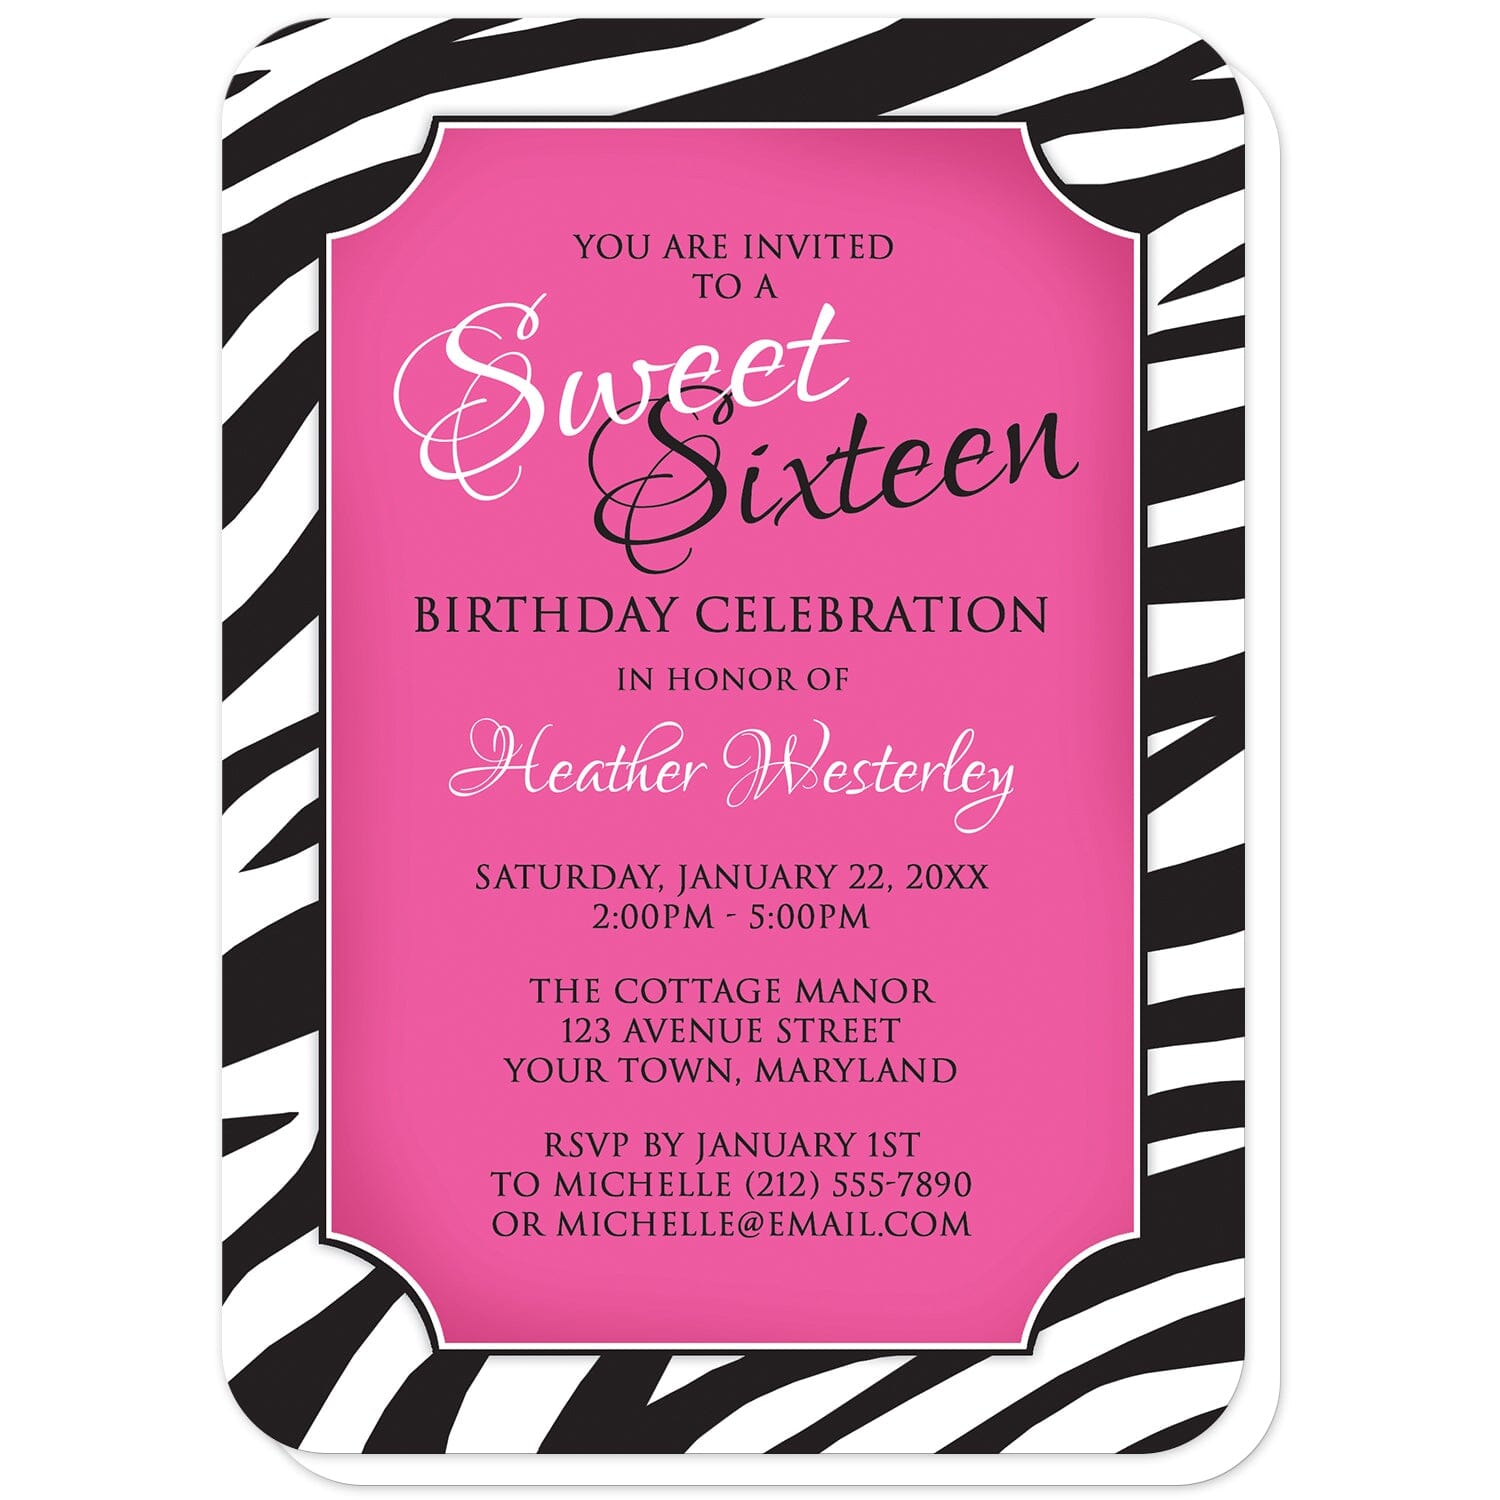 Chic Zebra Print Pink Sweet 16 Invitations (with rounded corners) at Artistically Invited. Modern and chic zebra print pink sweet 16 invitations with your personalized 16th birthday party details custom printed in black and white over a bold pink area in the center, above a black and white zebra stripes pattern. 